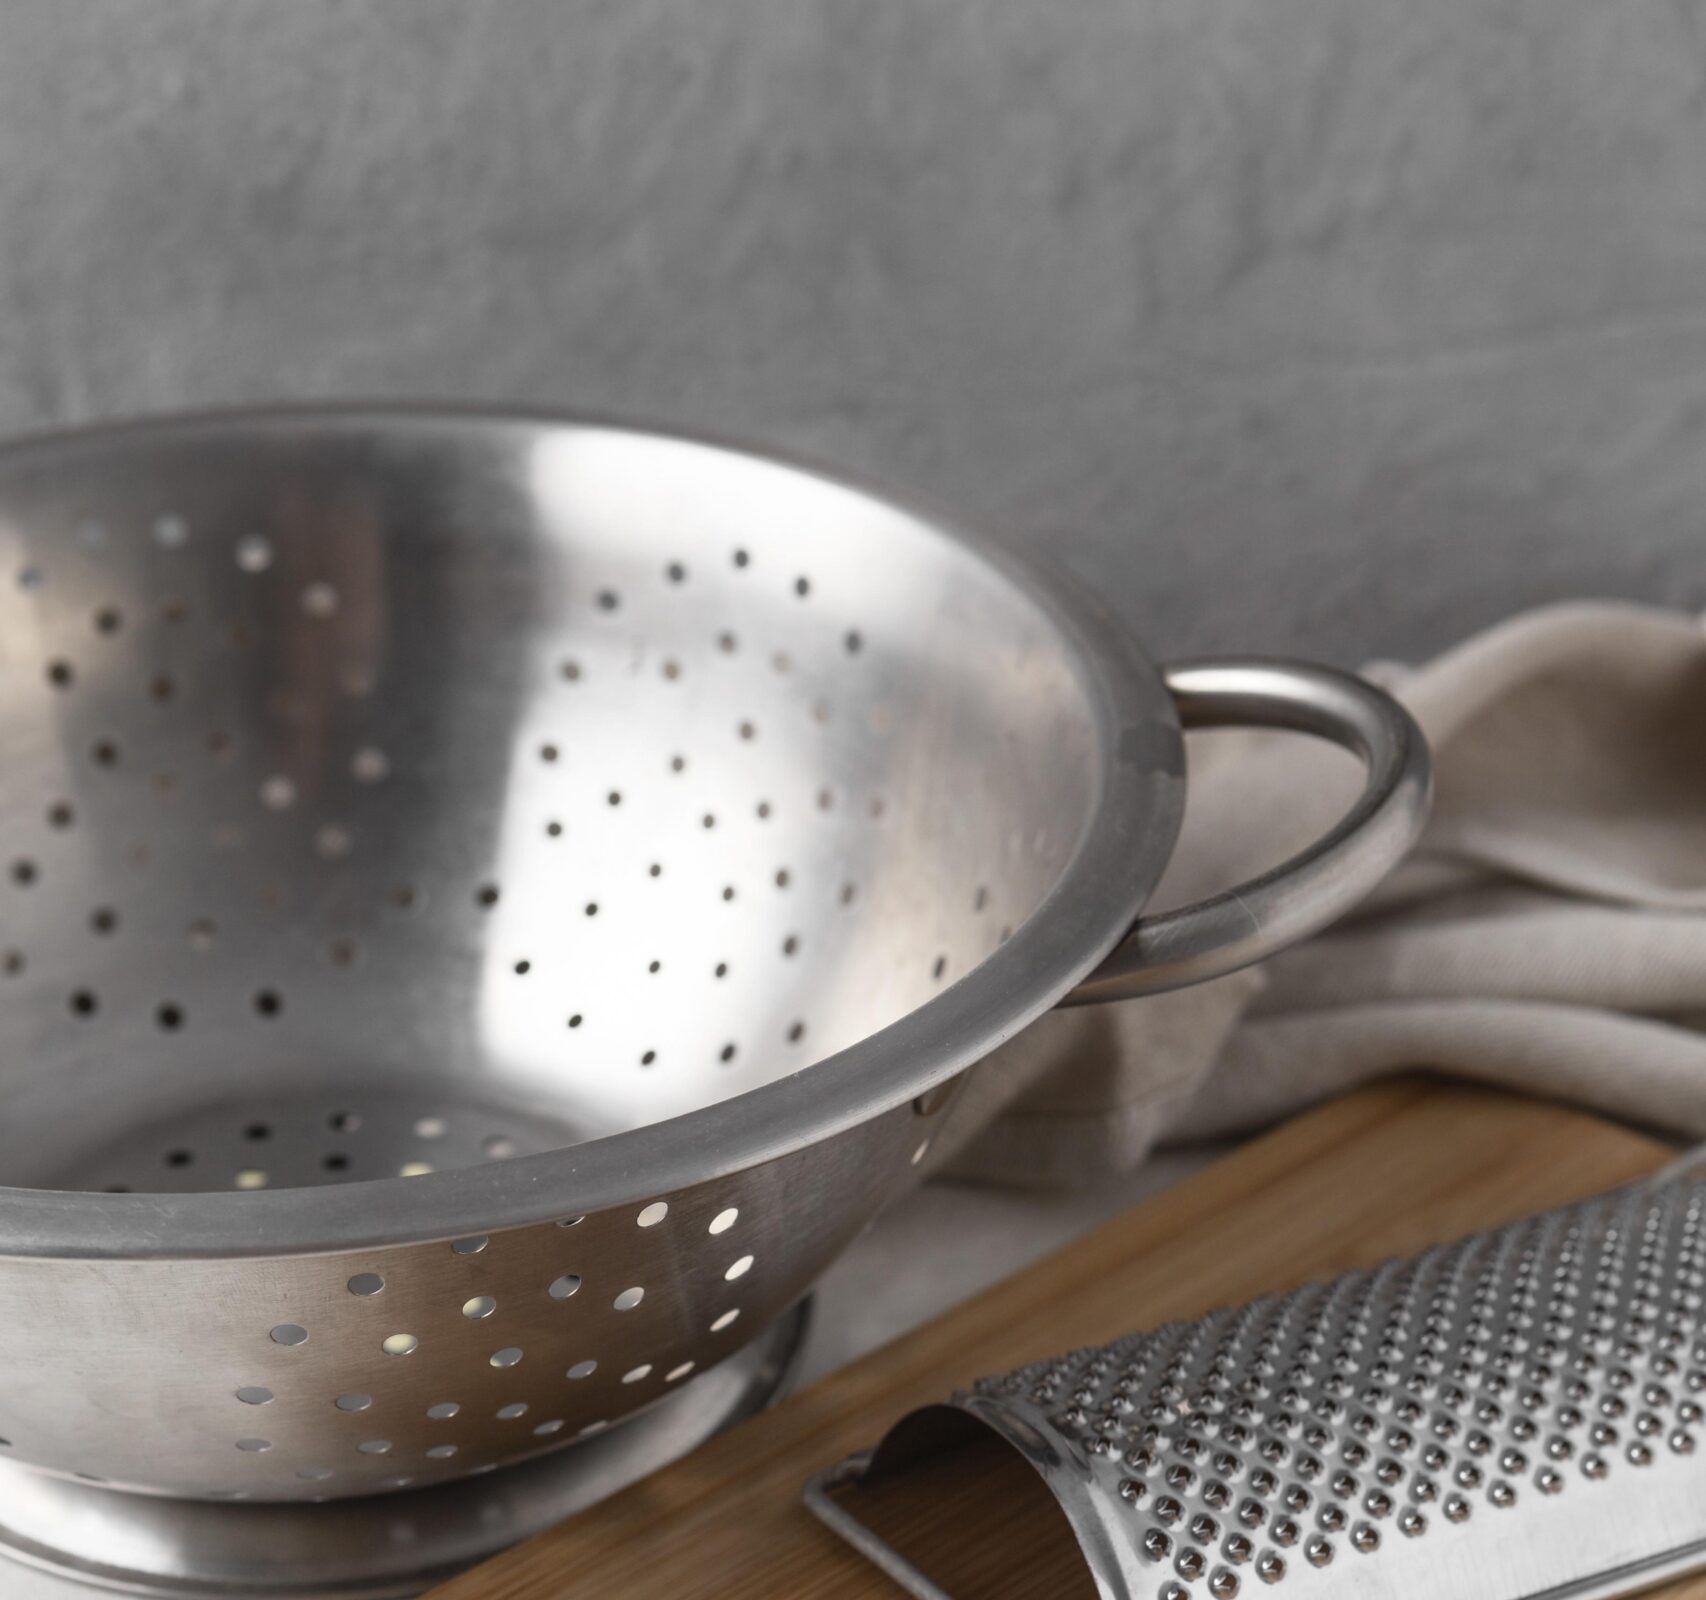 What Is a Colander Used For?